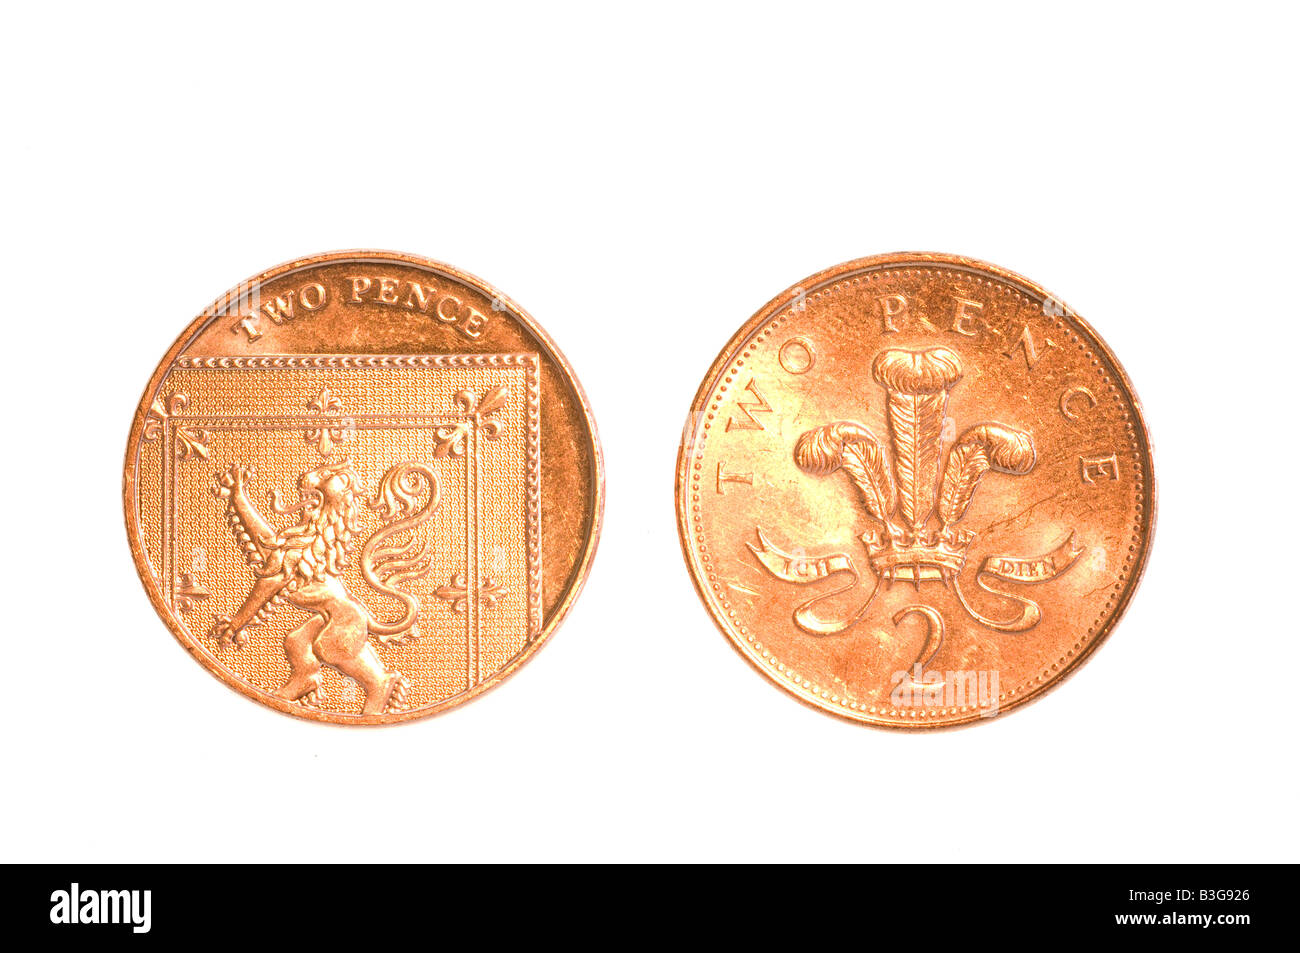 New 2008 two pence  piece and an old  two pence piece Stock Photo